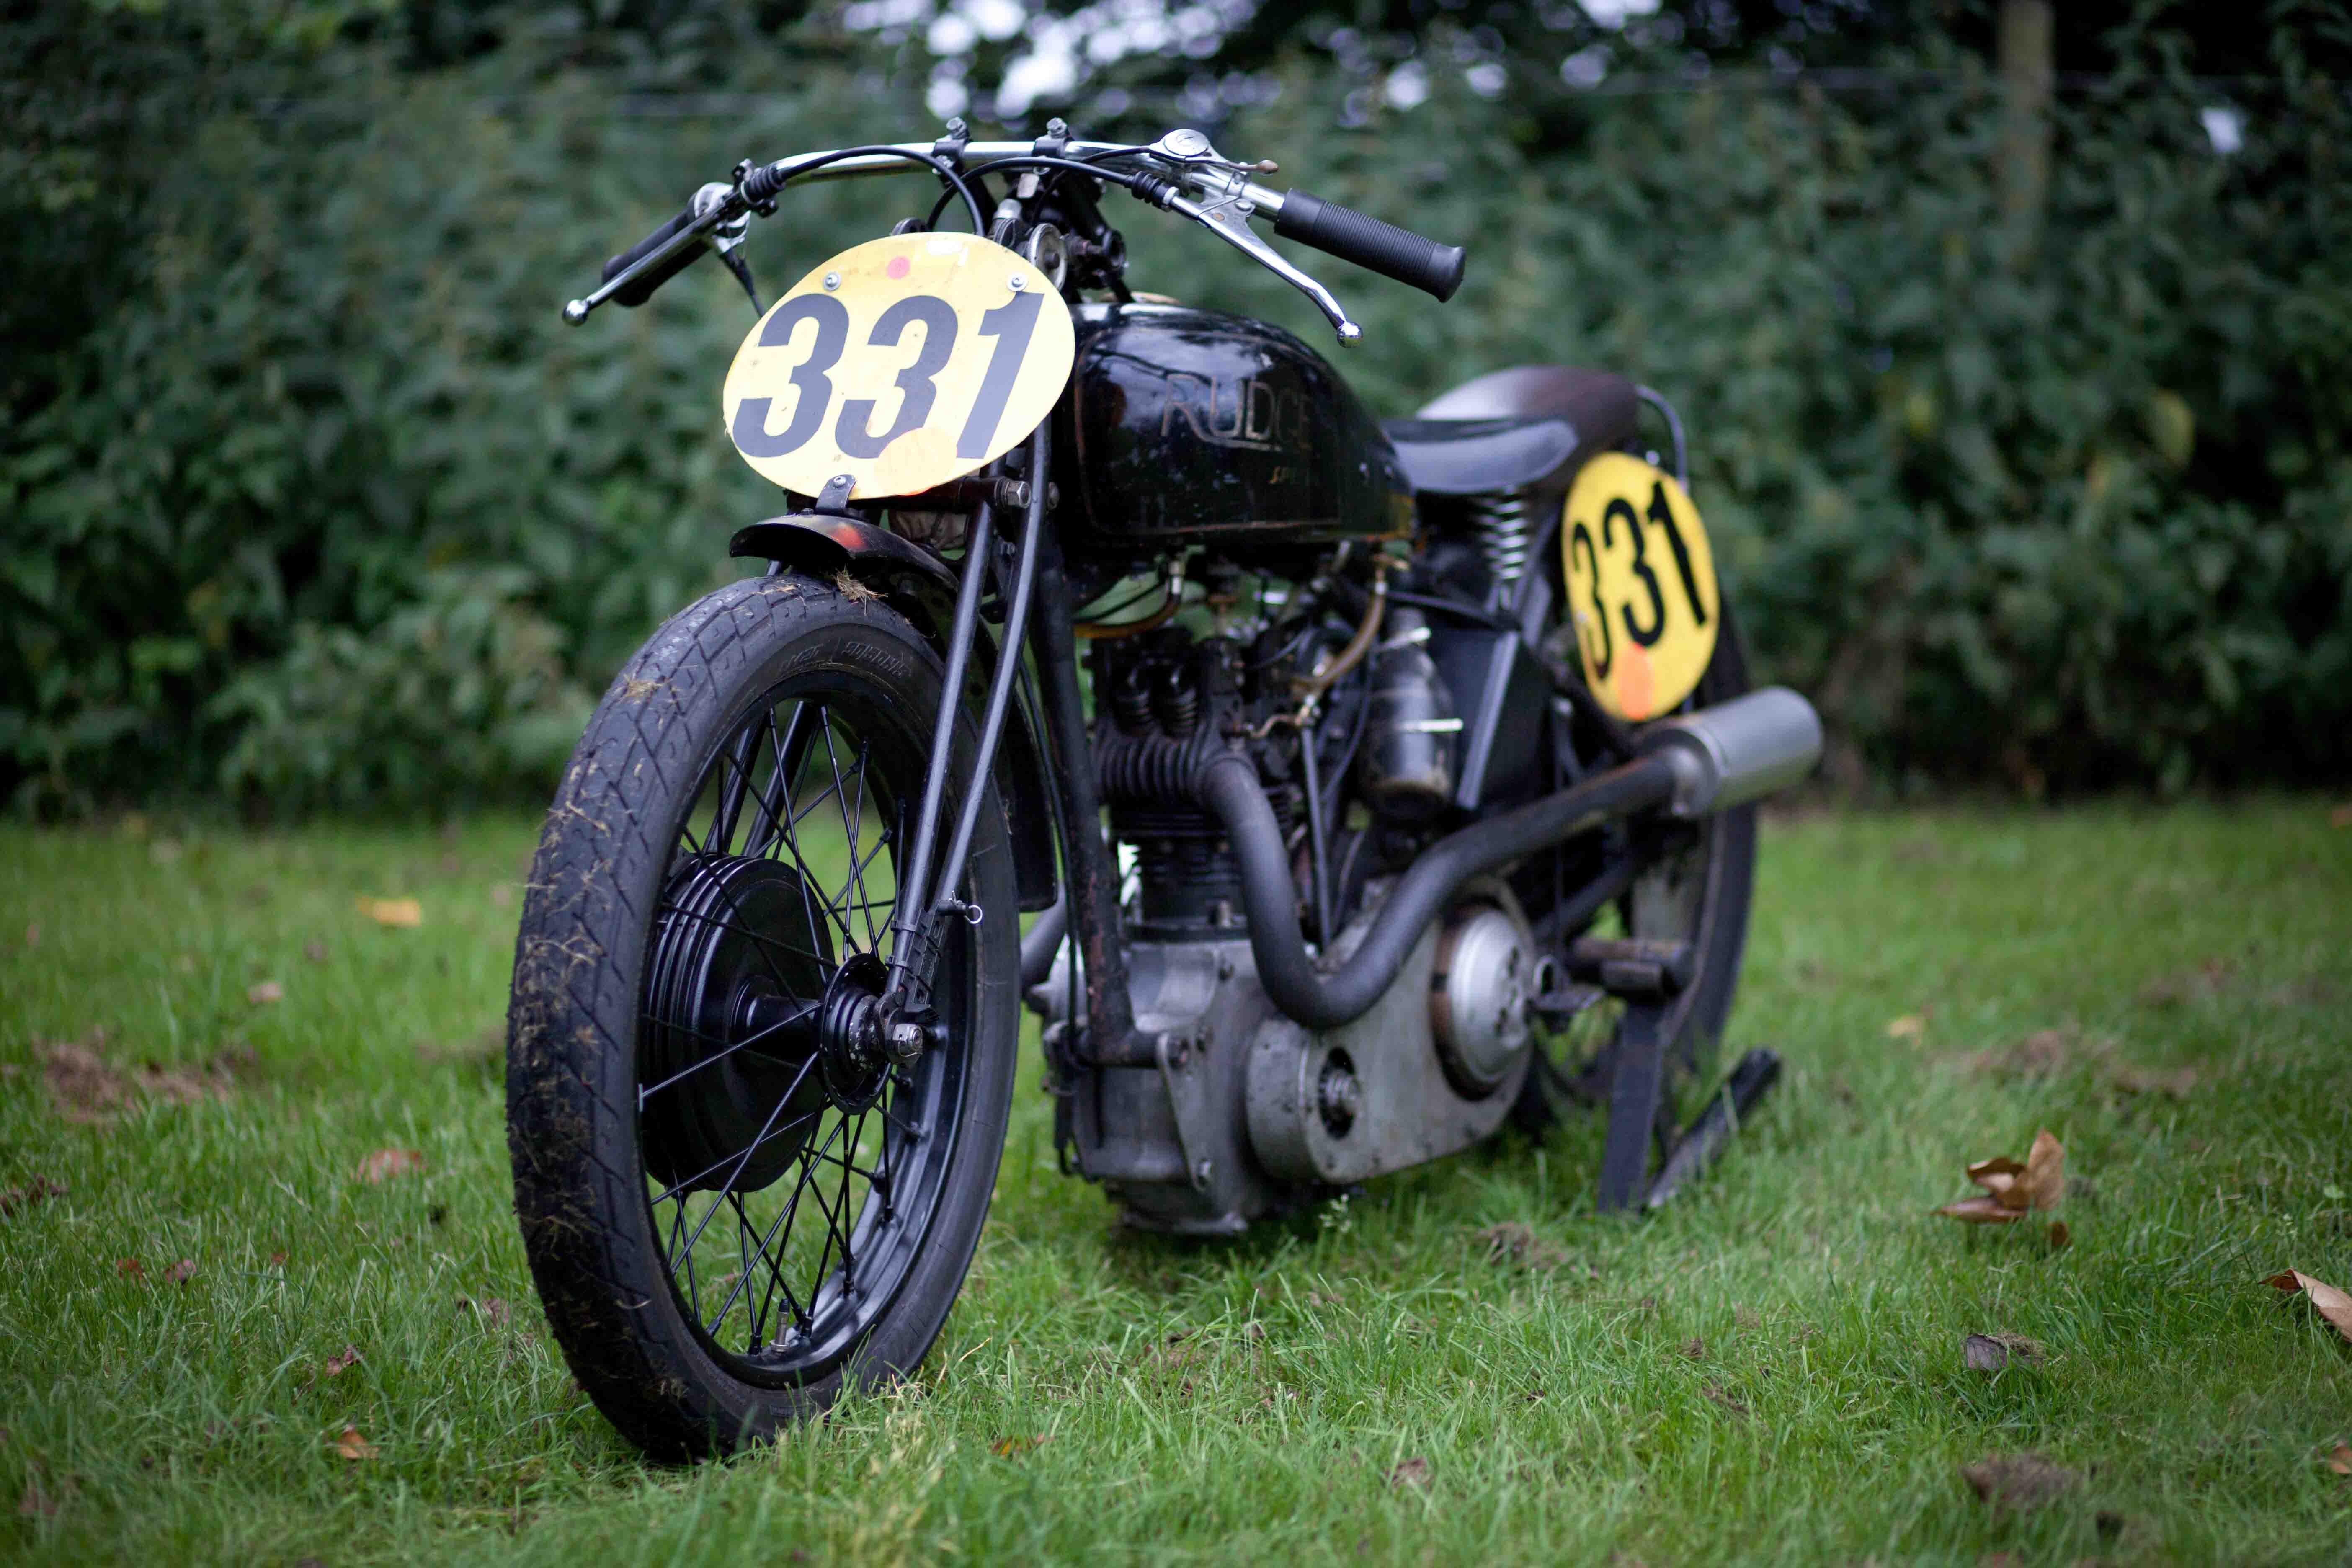 Vintage racing motorcycles for sale